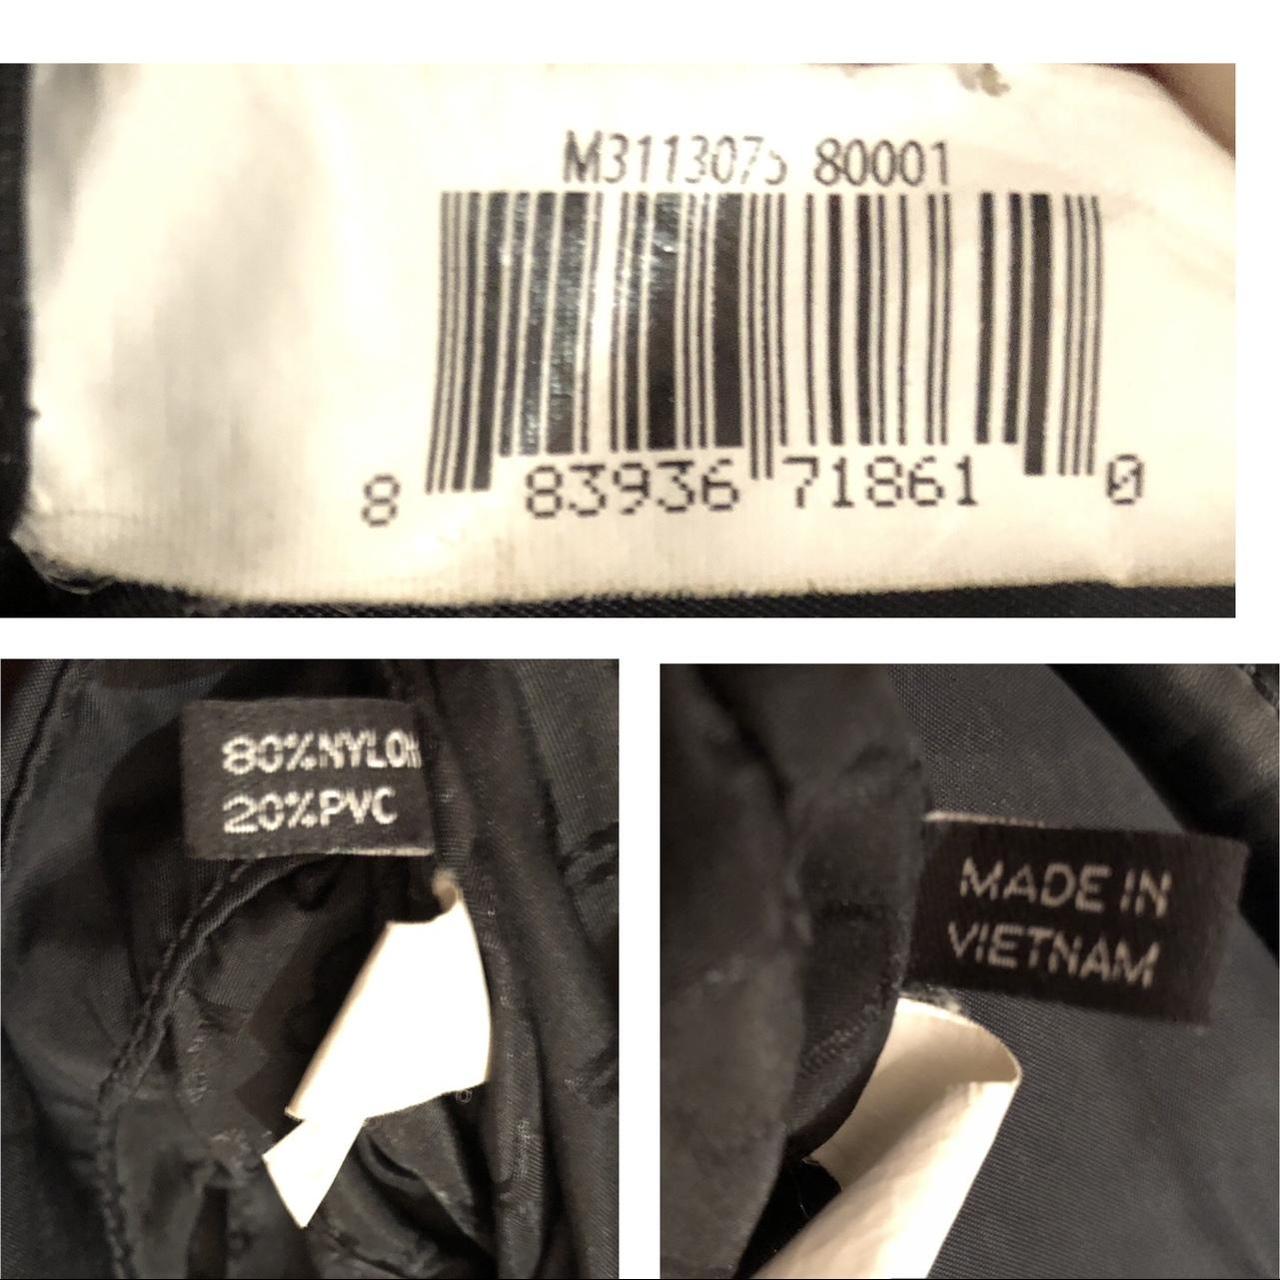 marc jacobs made in vietnam